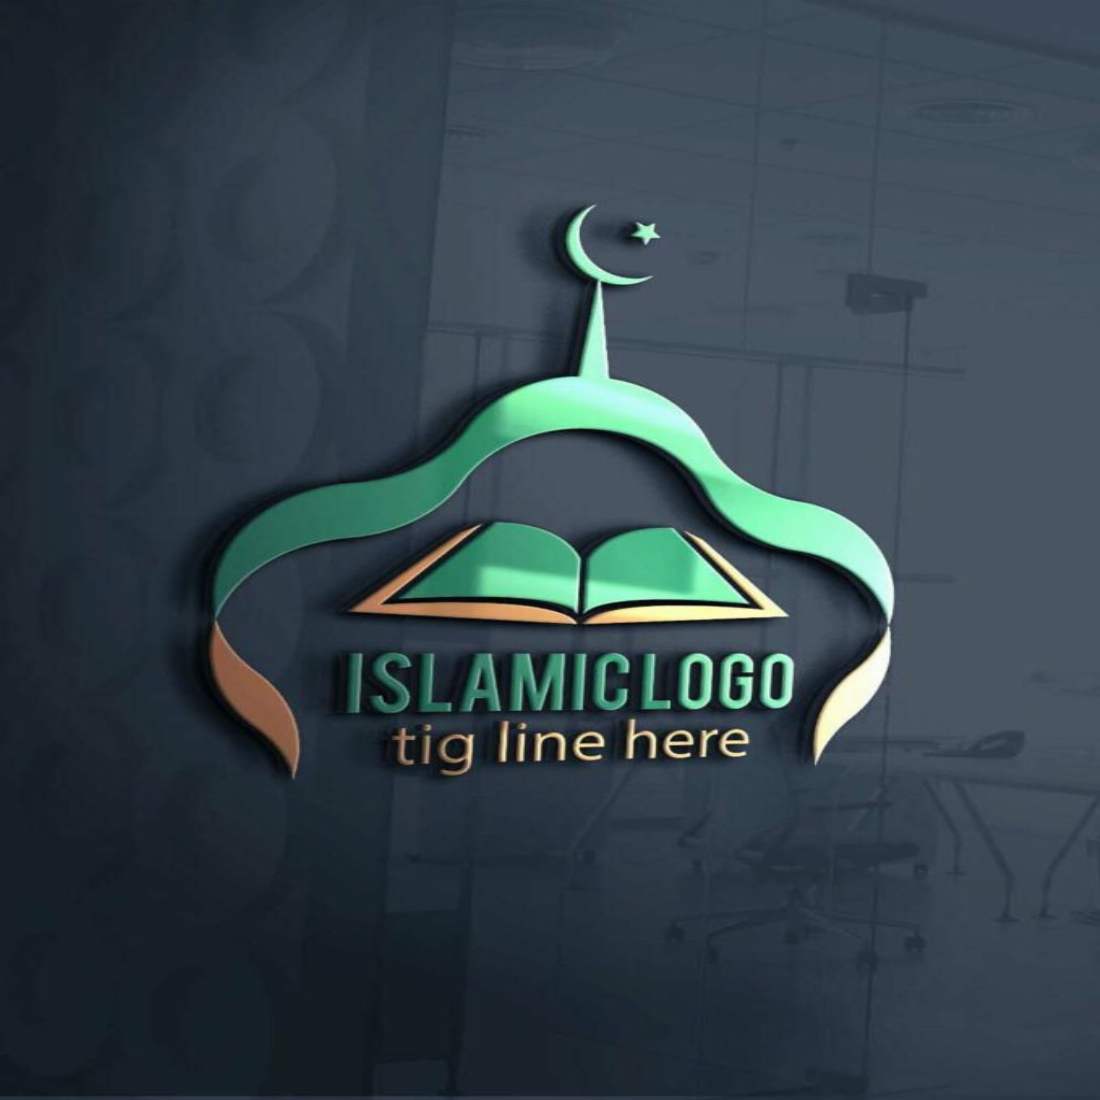 Islamic logo sell preview image.